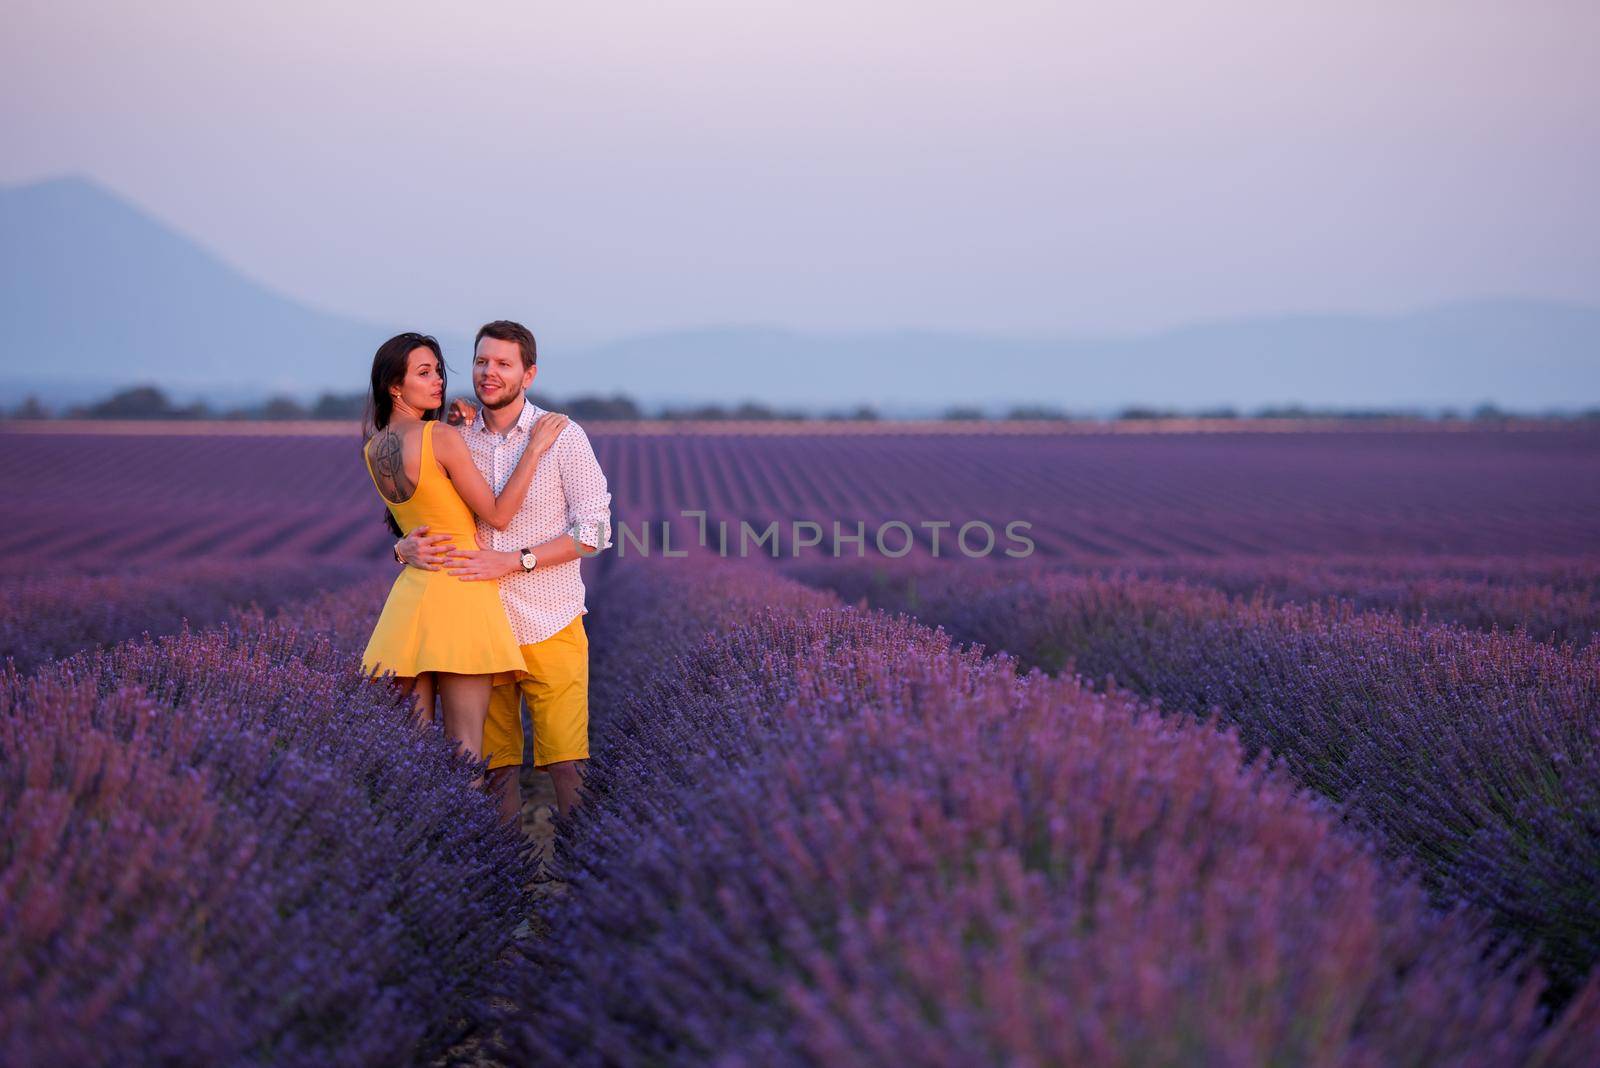 young loving couple having romantic time hugging and kissing on purple lavender flower field in sunset